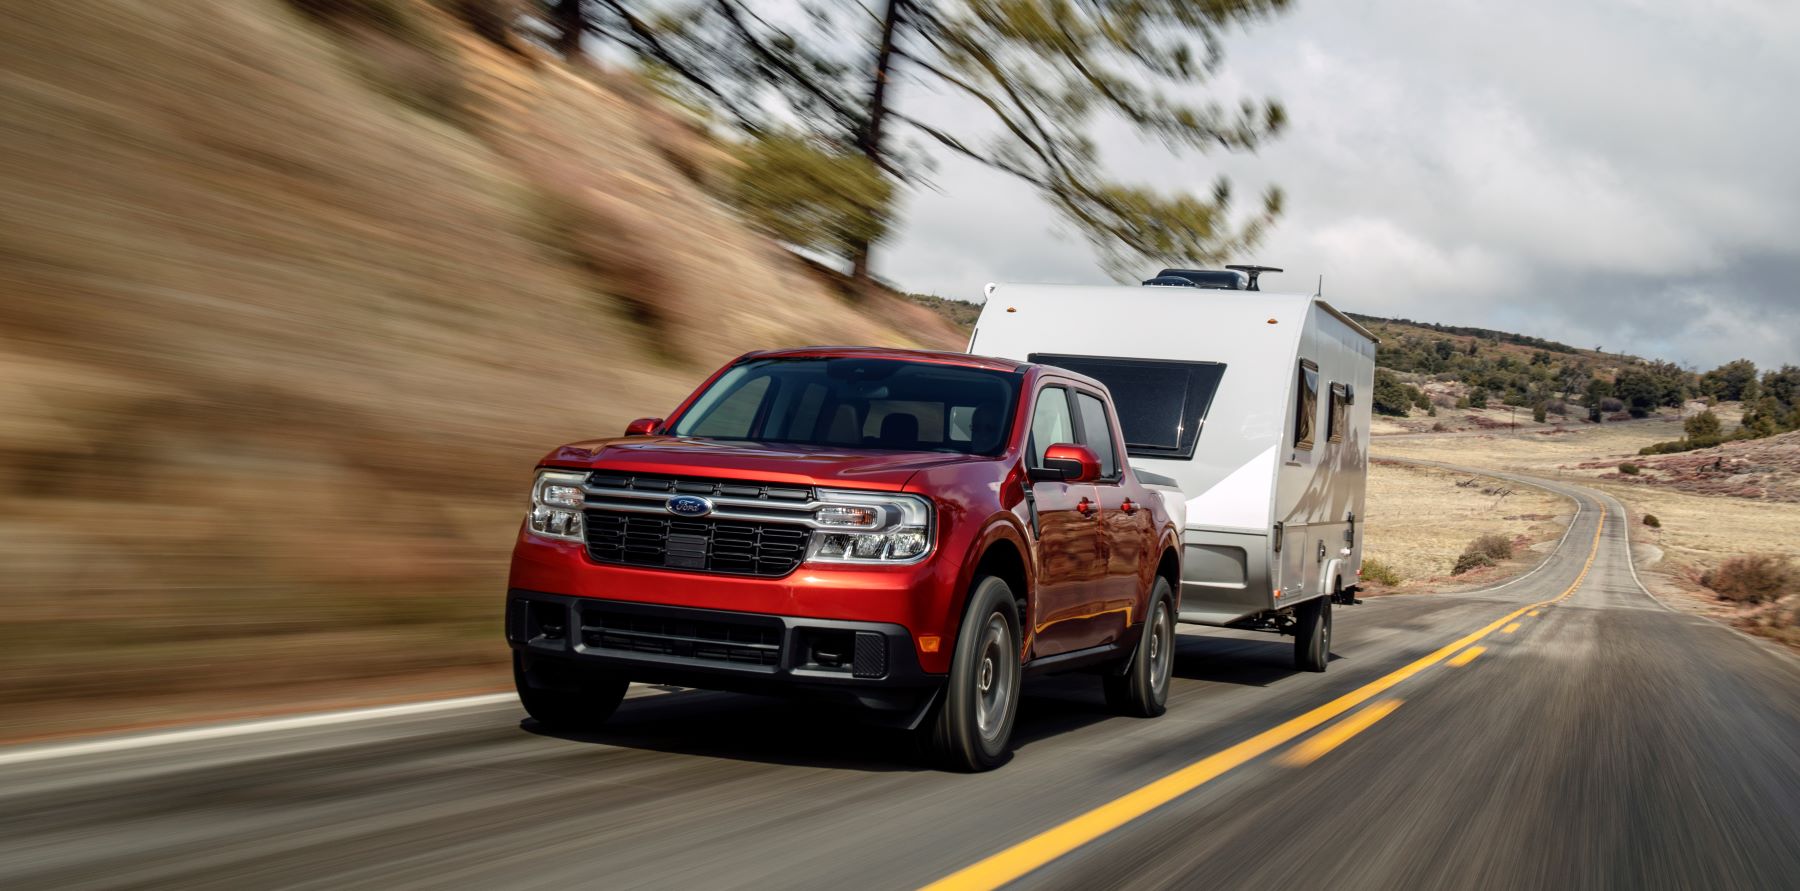 A red 2022 Ford Maverick Lariat towing an RV camper motorhome down a stretch of country highway